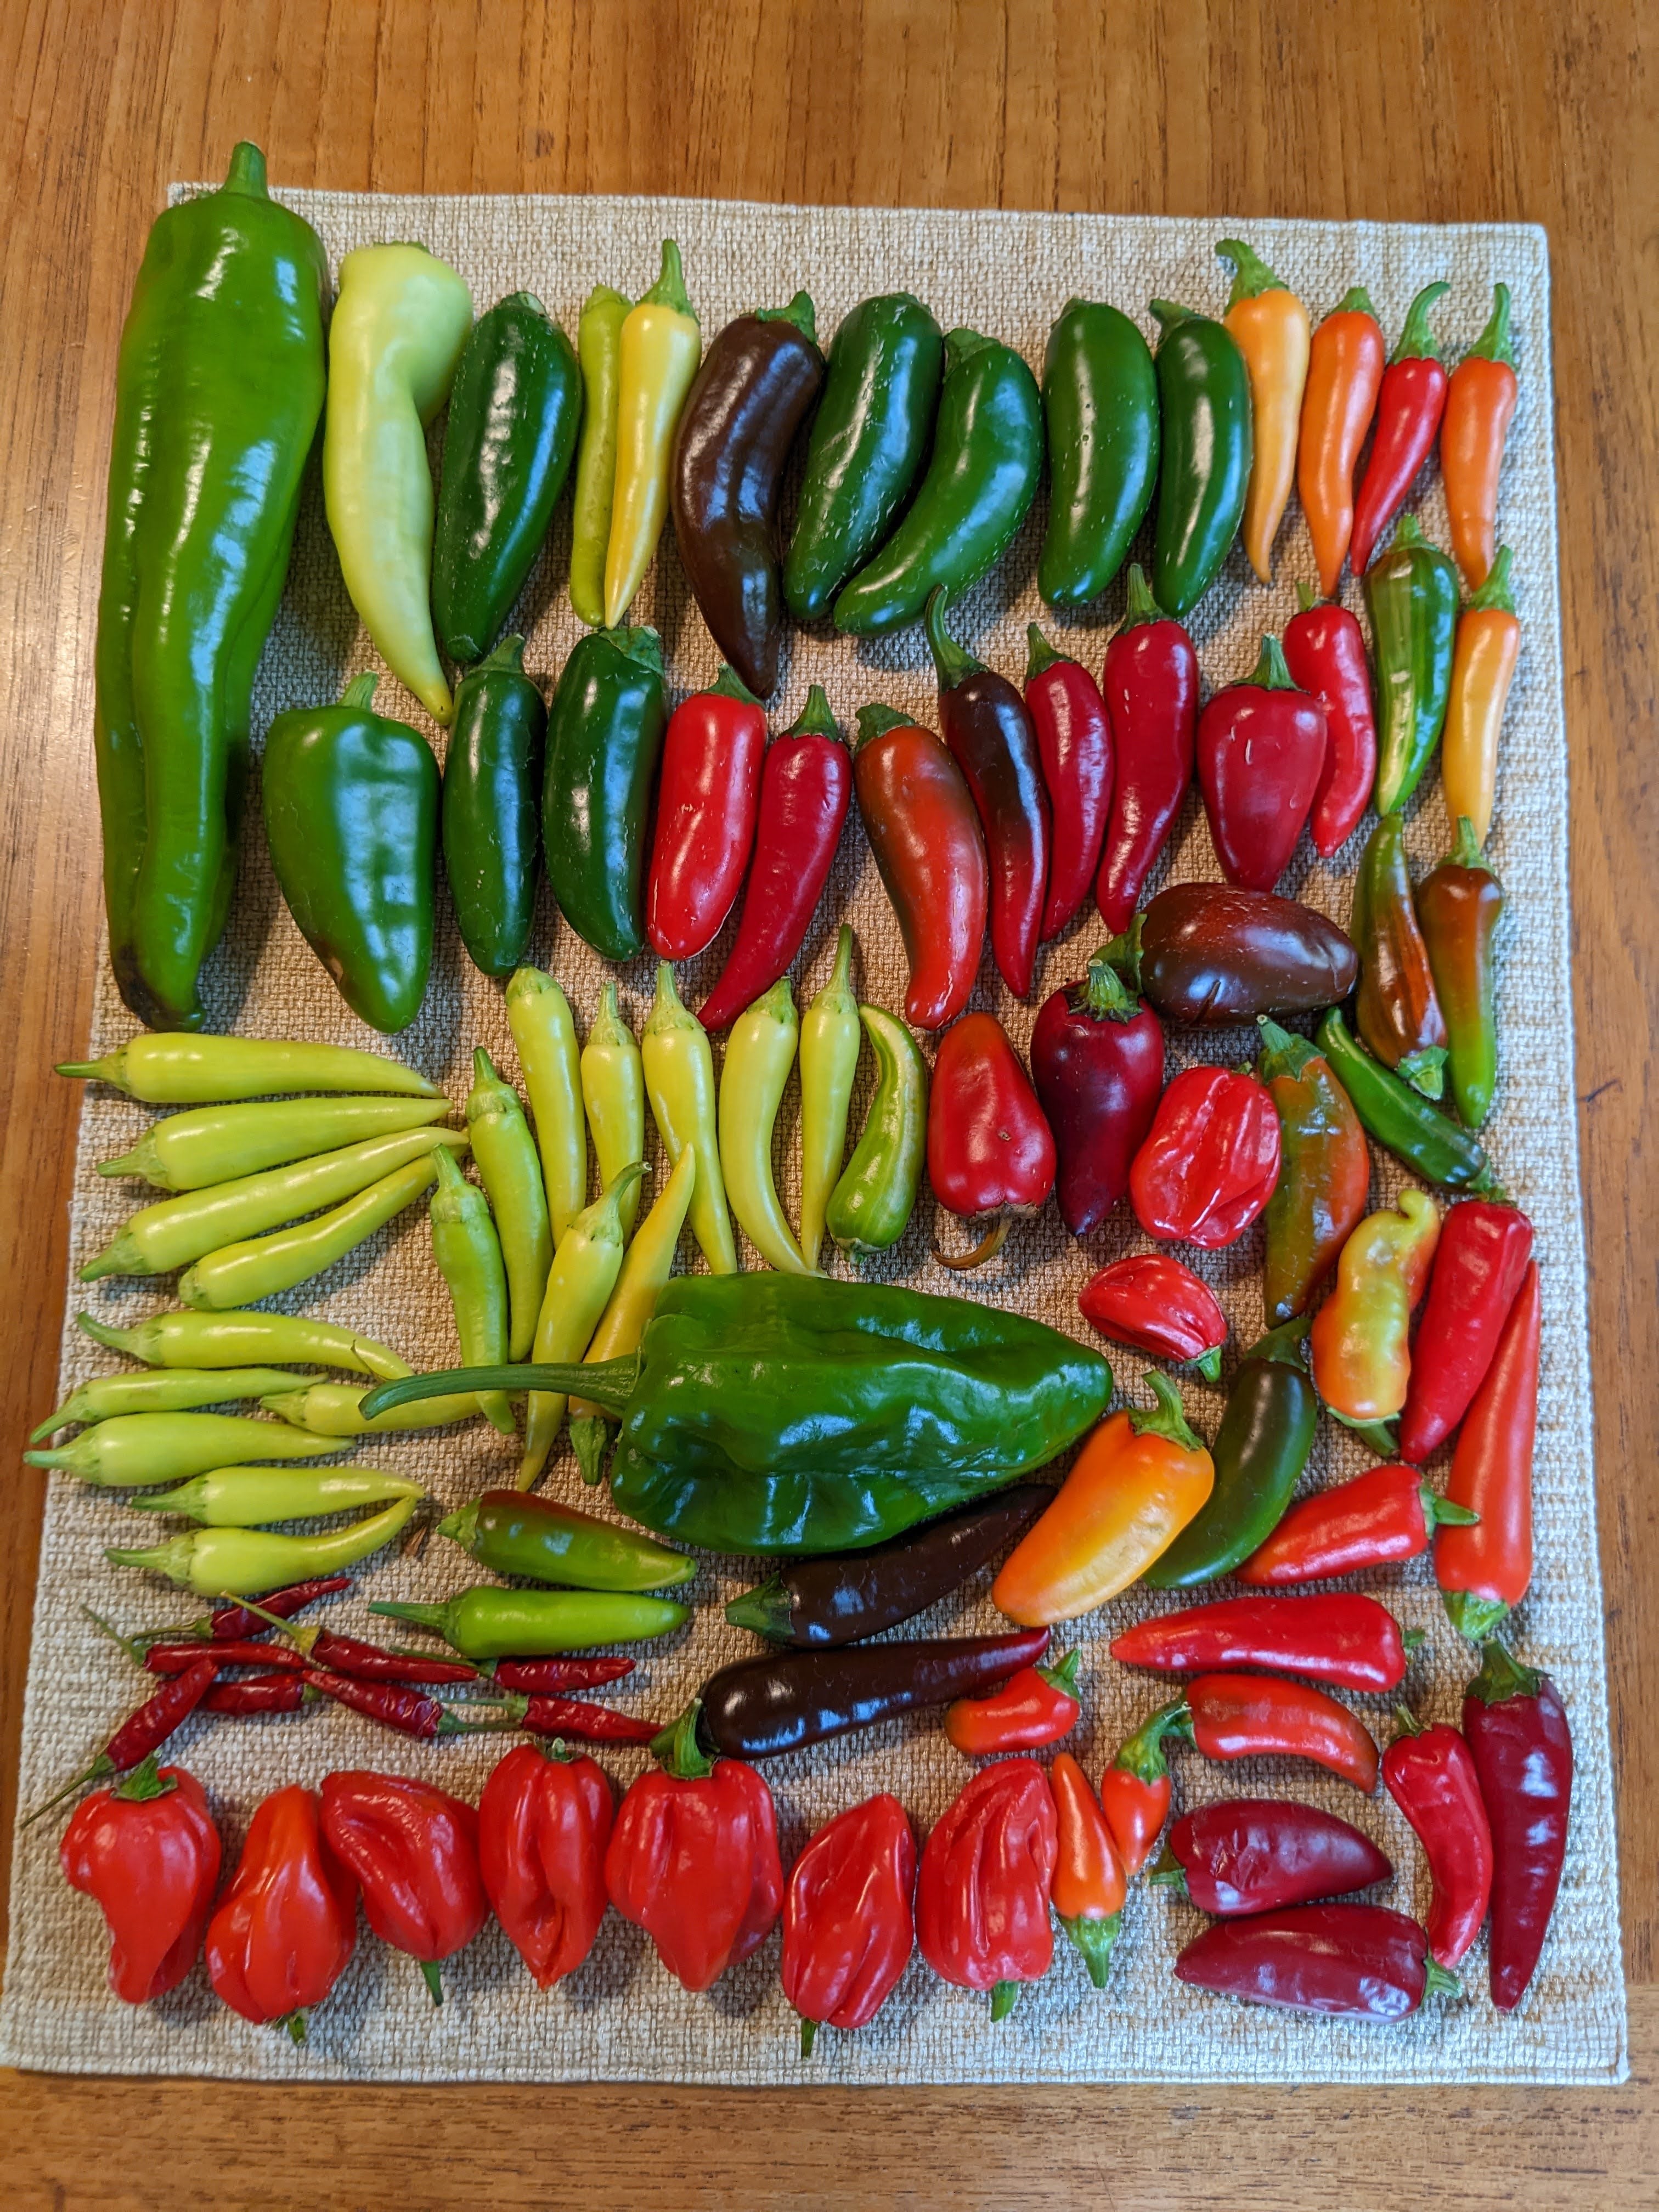 Best Chile Seeds come in a wide arrange of colors and heat!